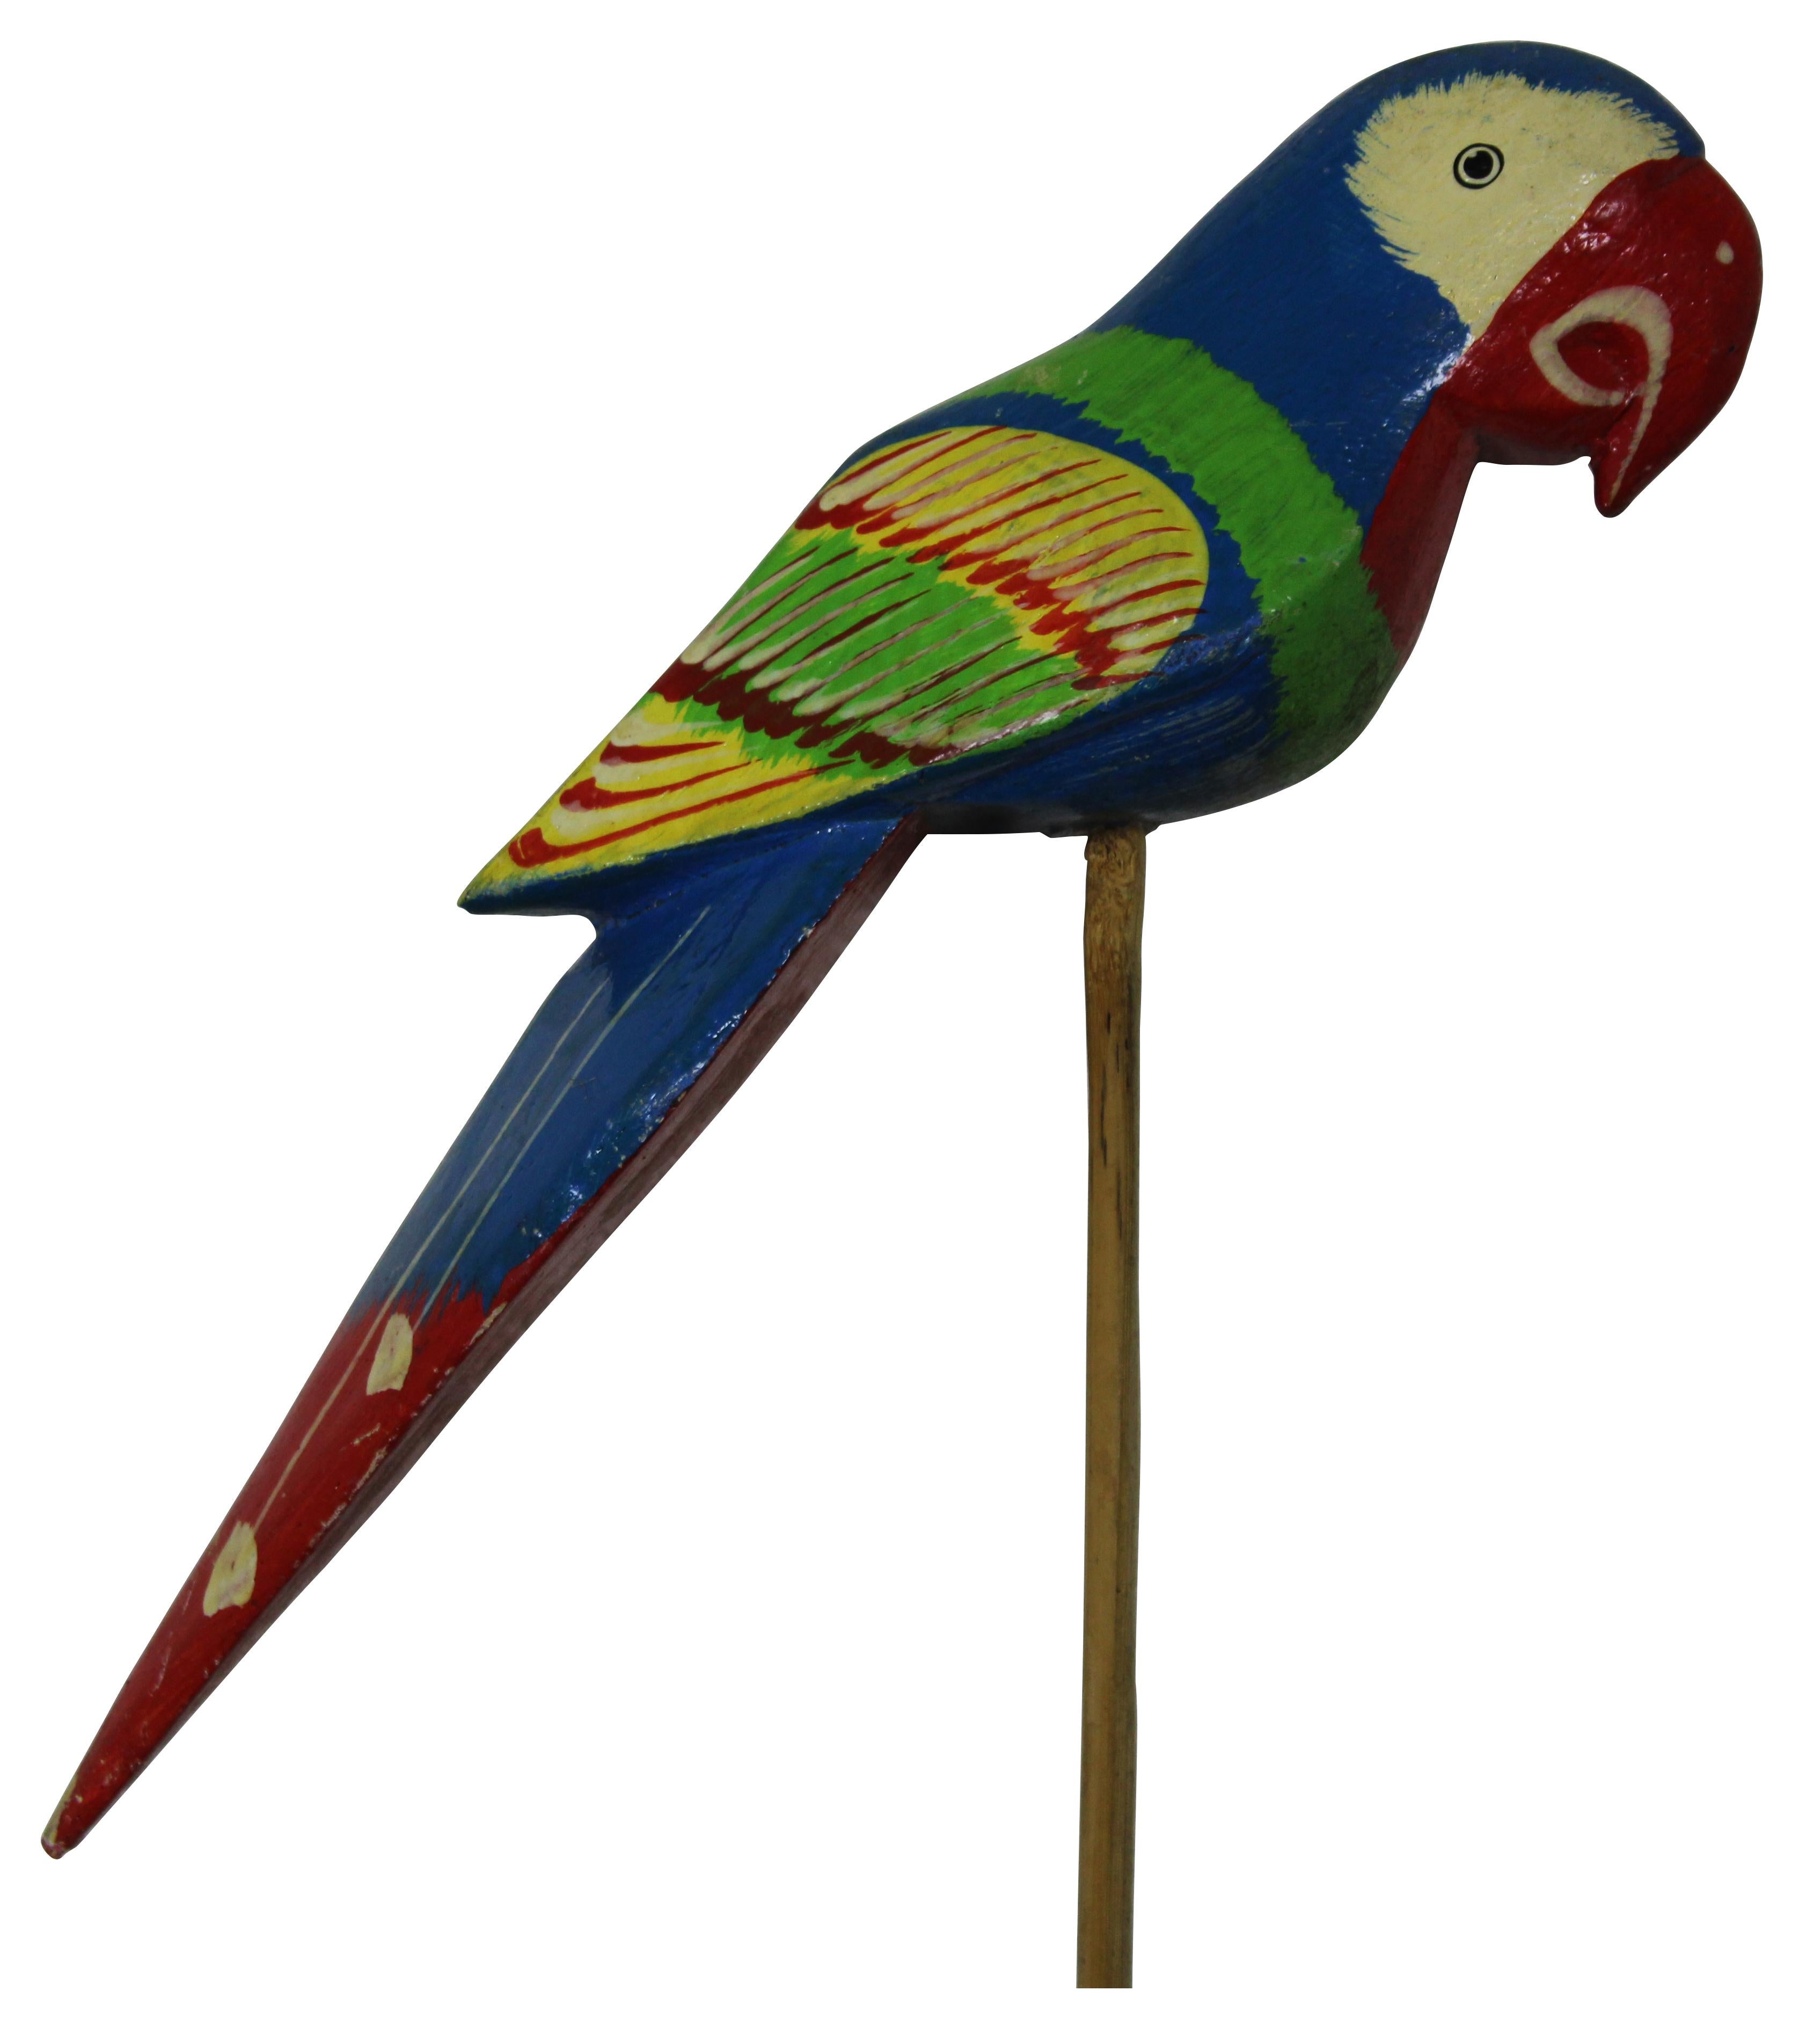 Vintage brightly painted carved wood figurine of a parrot, perched on a dowel rod.